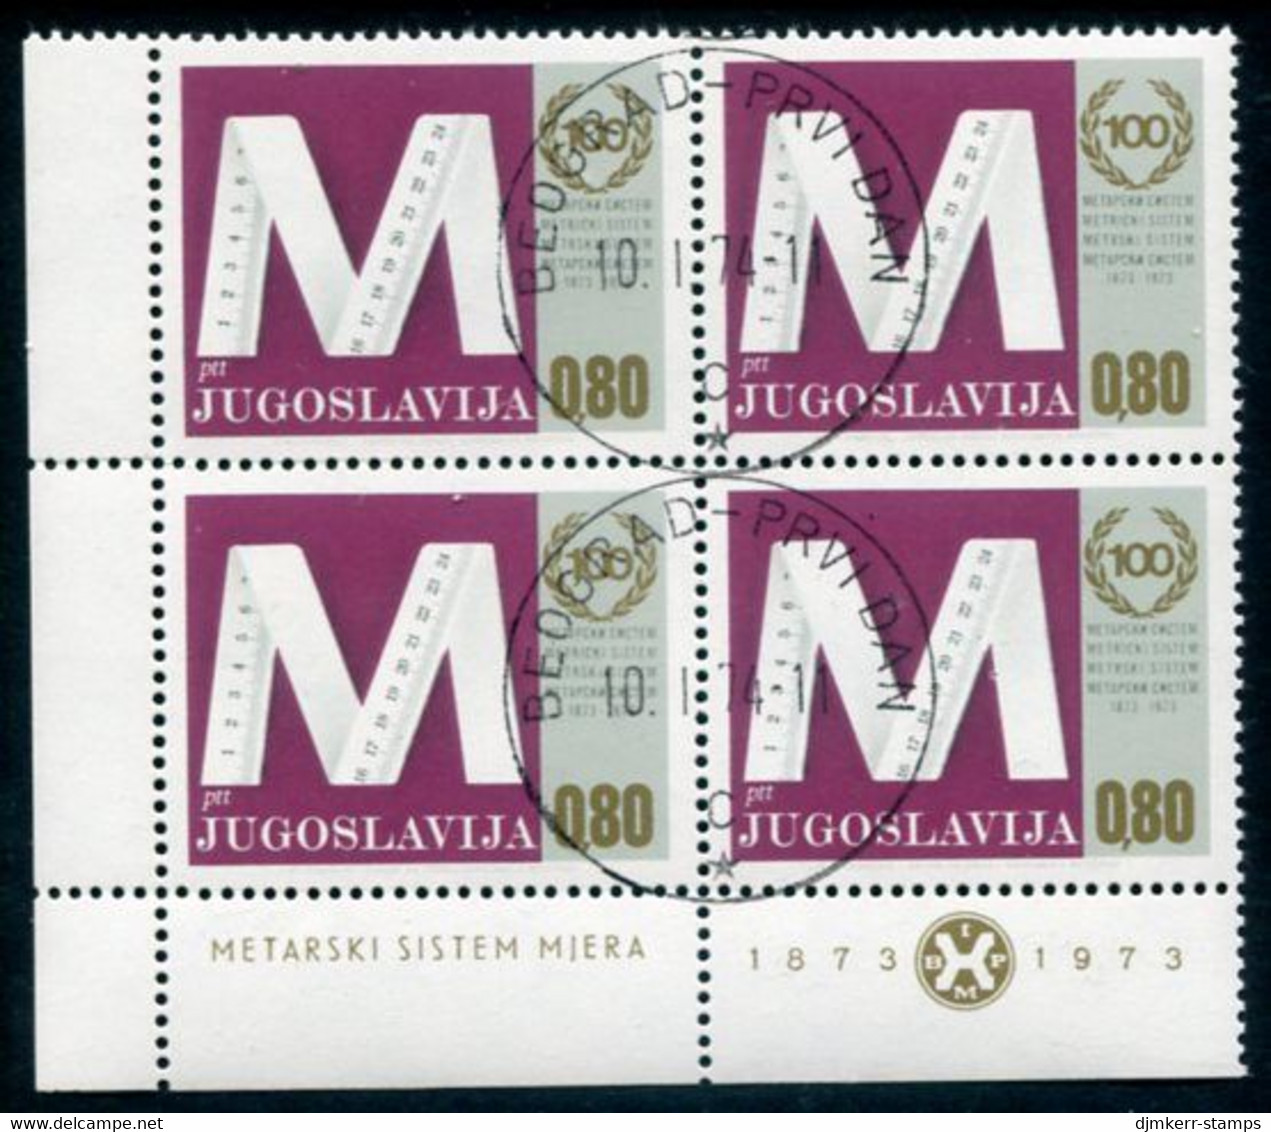 YUGOSLAVIA 1974 Centenary Of Metric System Block Of 4 Used.  Michel 1538 - Used Stamps